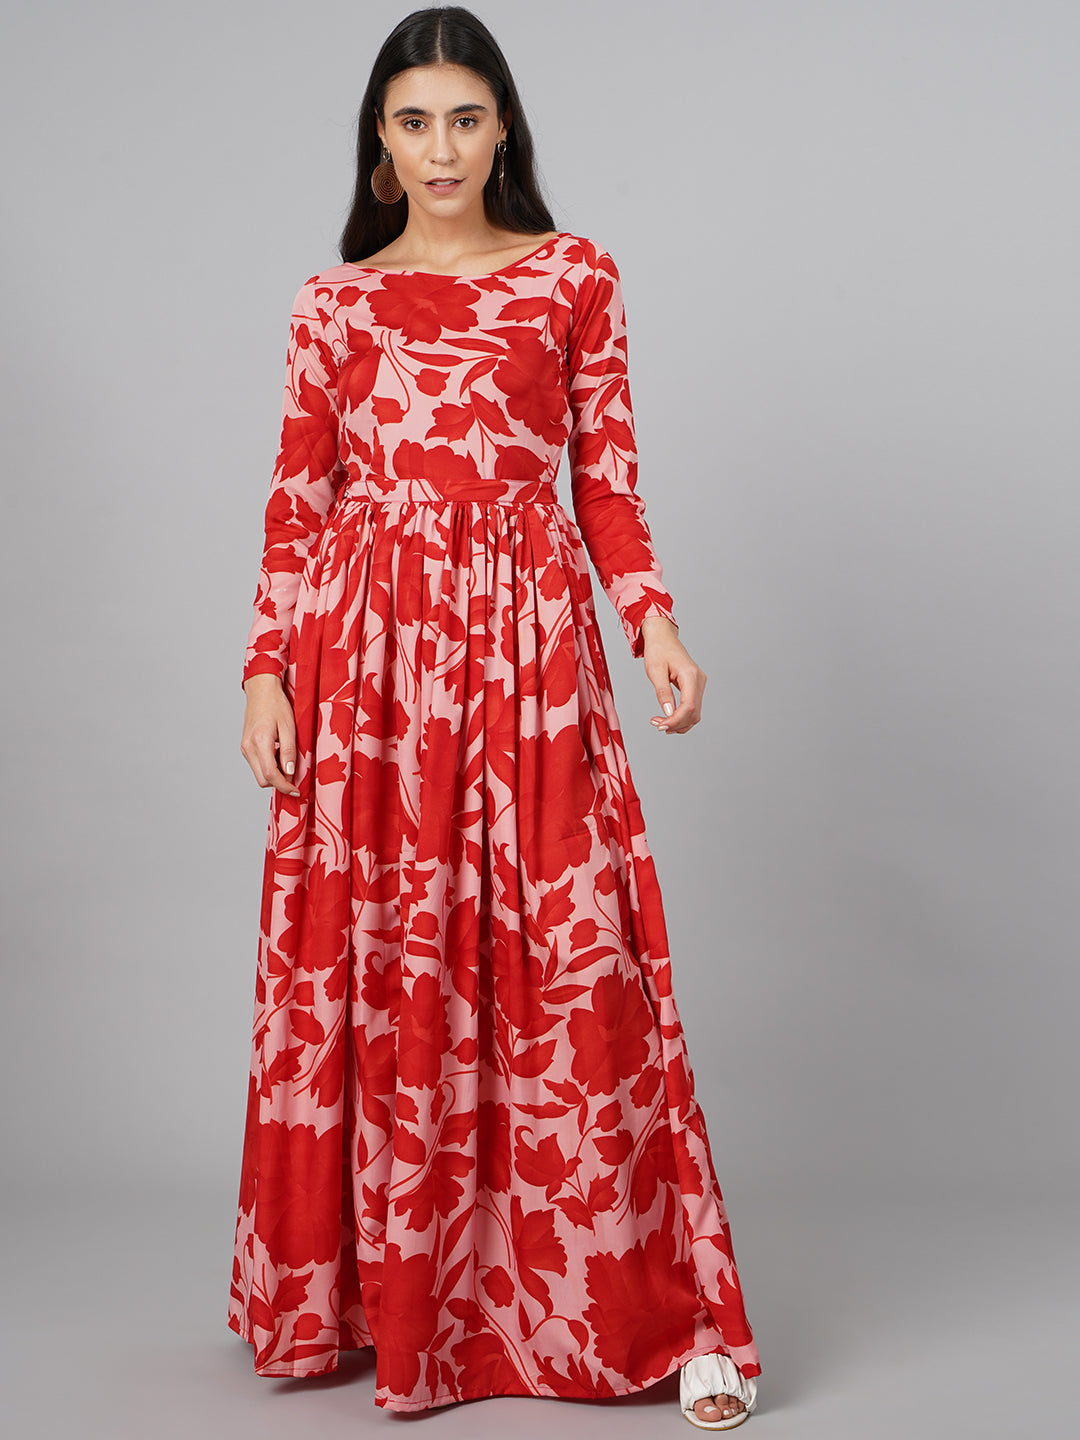 SCORPIUS Red Floral Maxi Dress